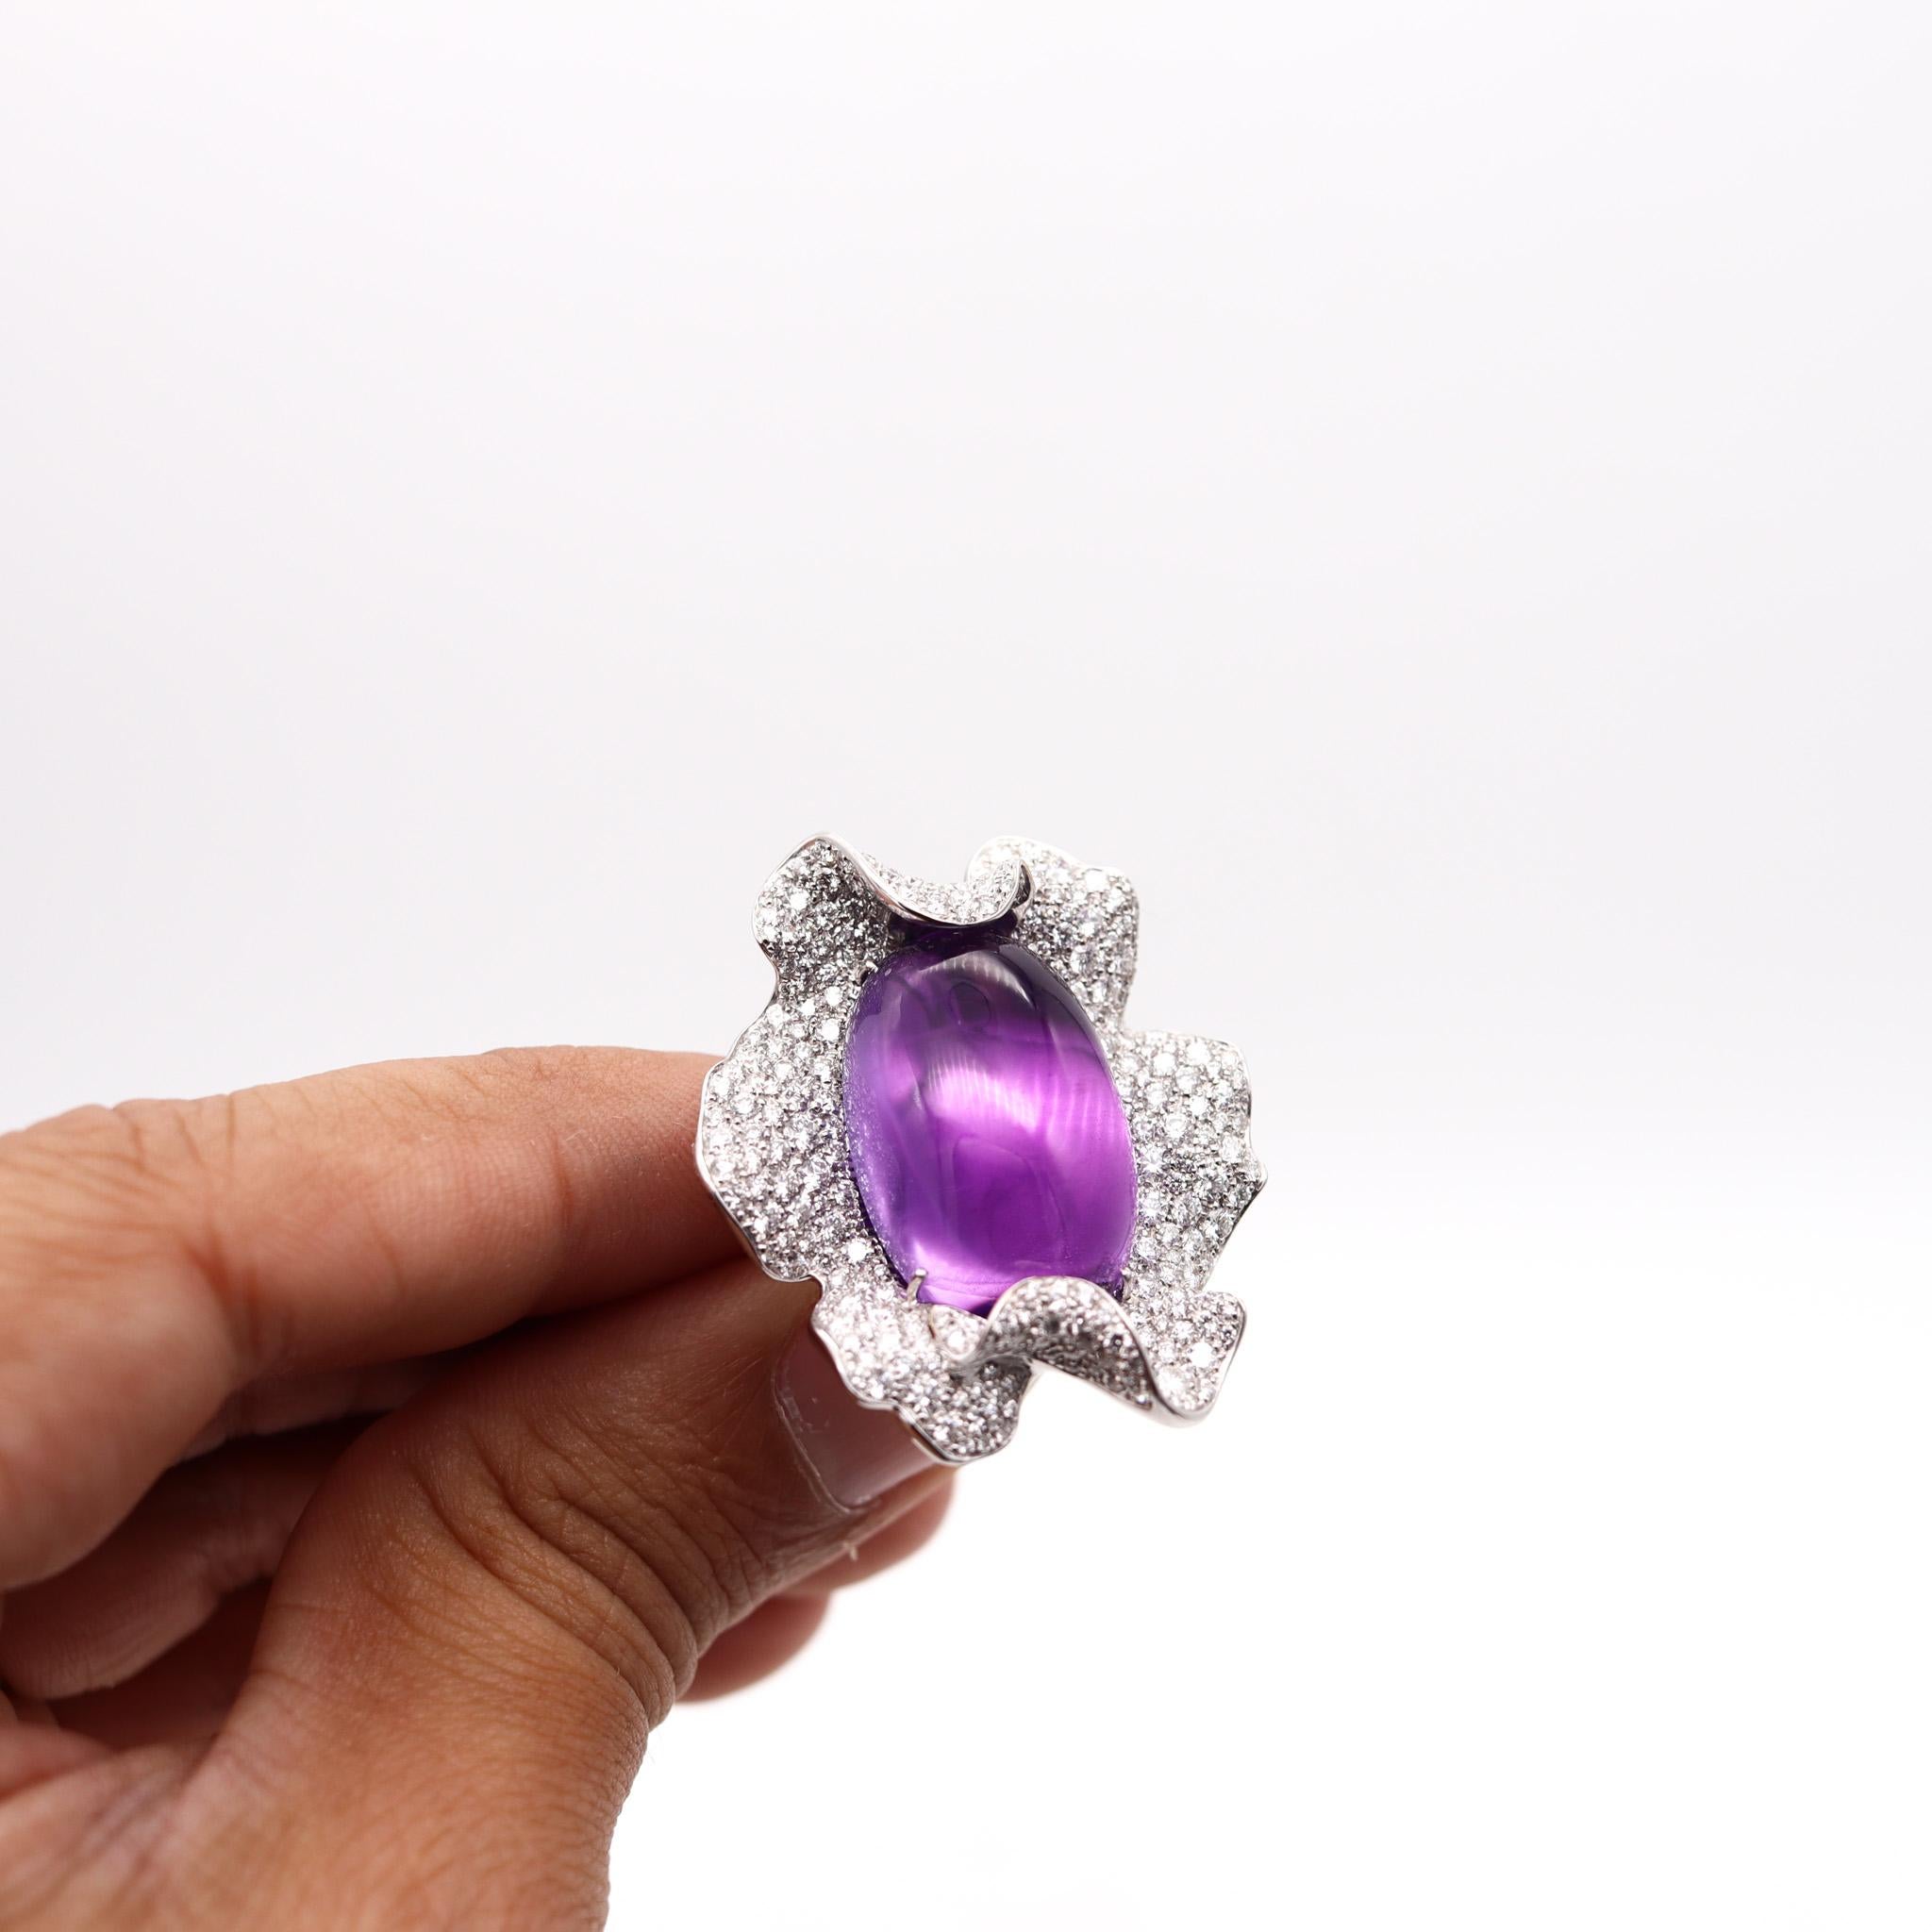 Women's Palmiero Milano Cocktail Ring In 18Kt White Gold 33.09 Ctw Diamonds And Amethyst